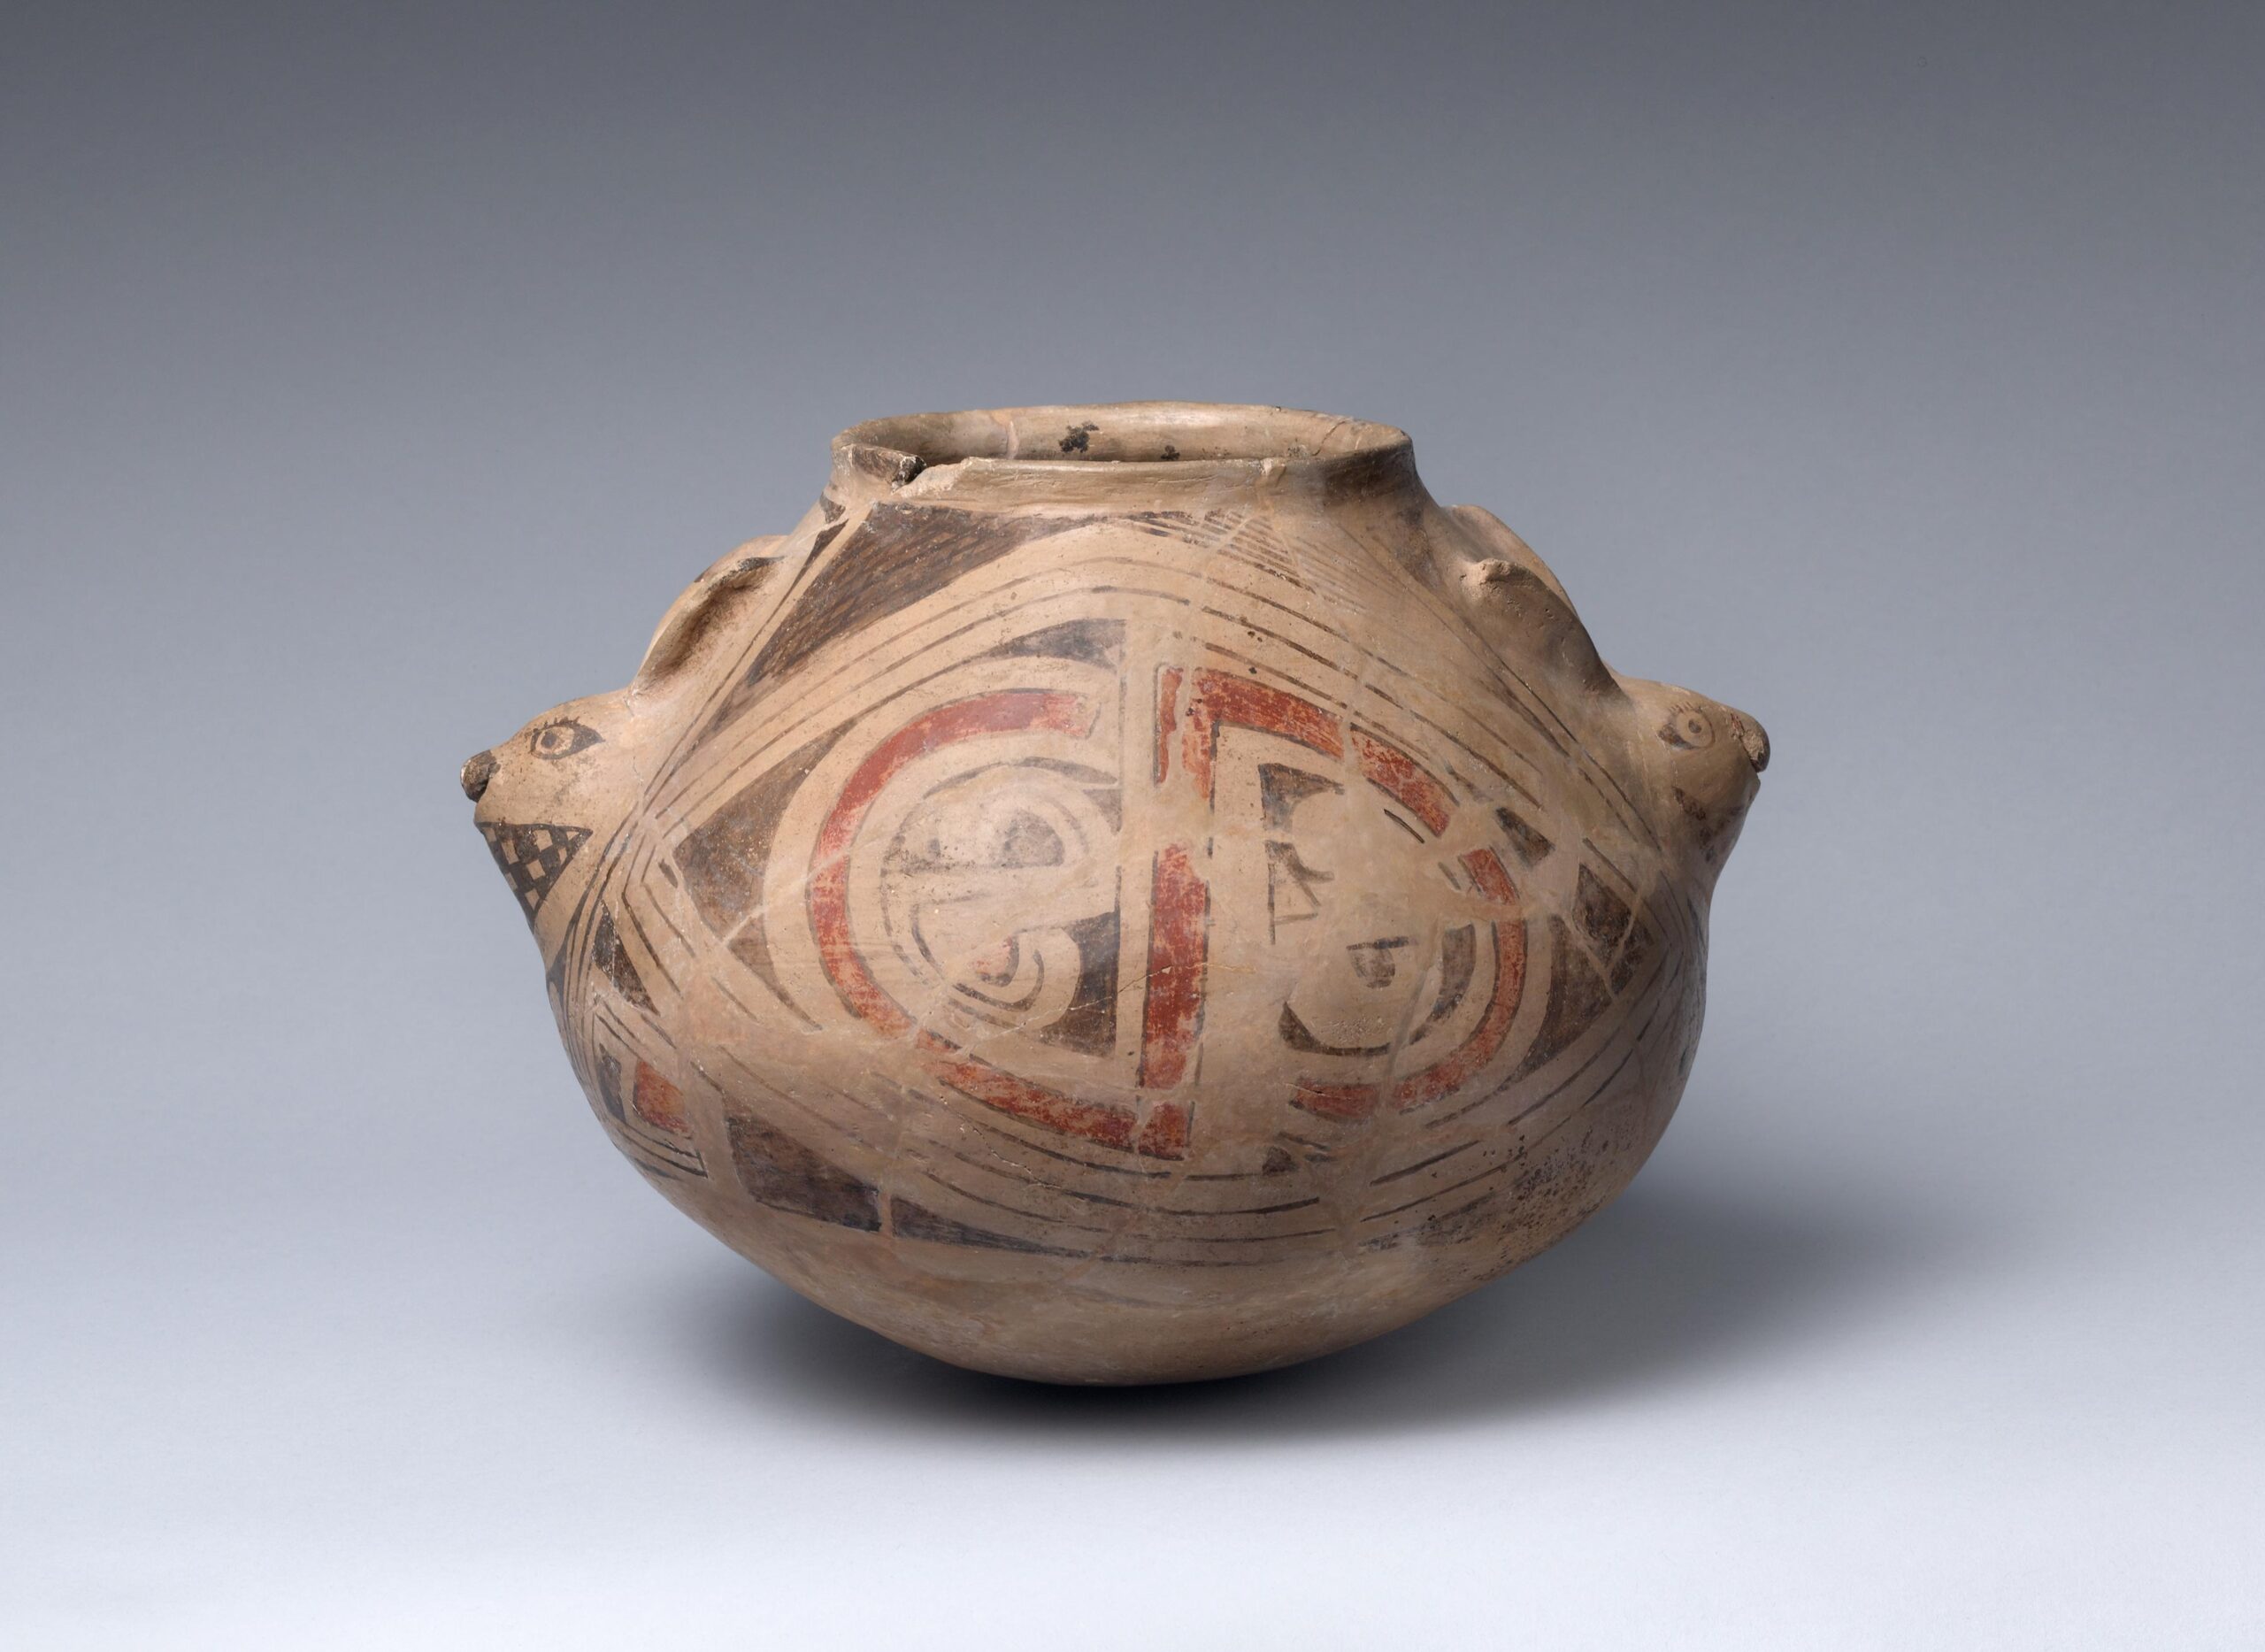 Decorative ceramic bowl covered with complex, interlocking geometrical designs with two abstract rabbit heads on either side.